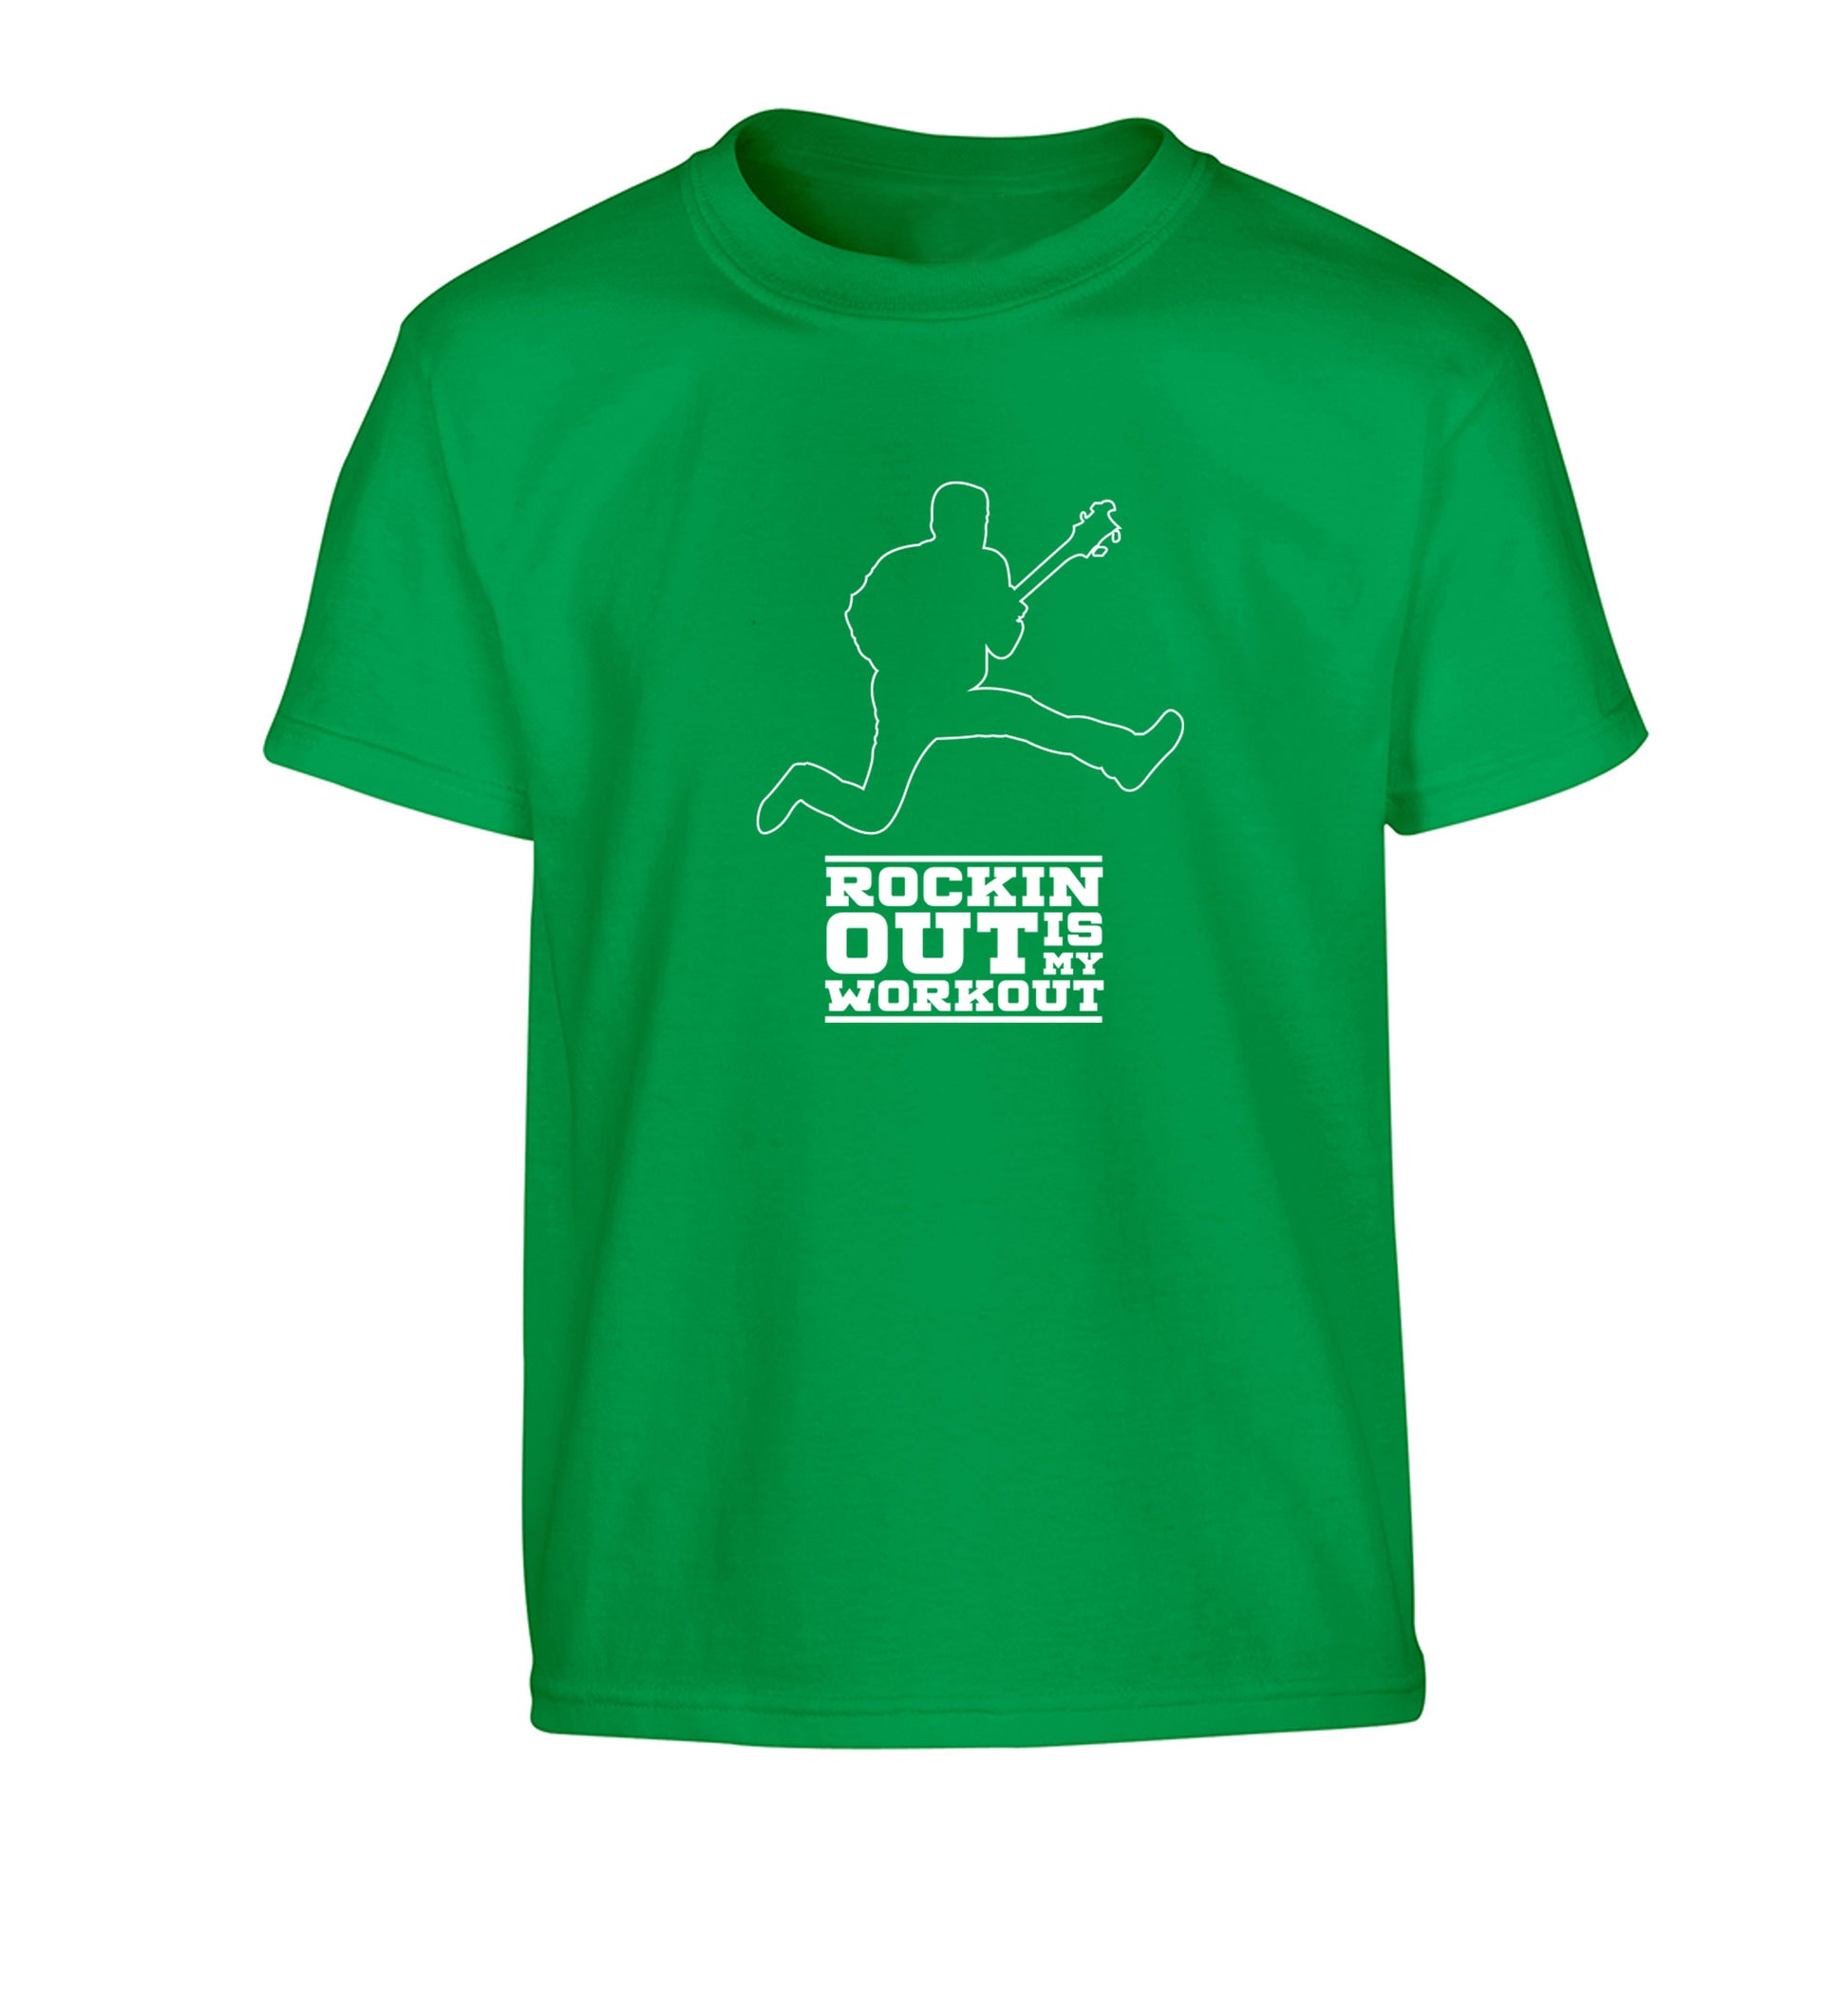 Rockin out is my workout 2 Children's green Tshirt 12-13 Years